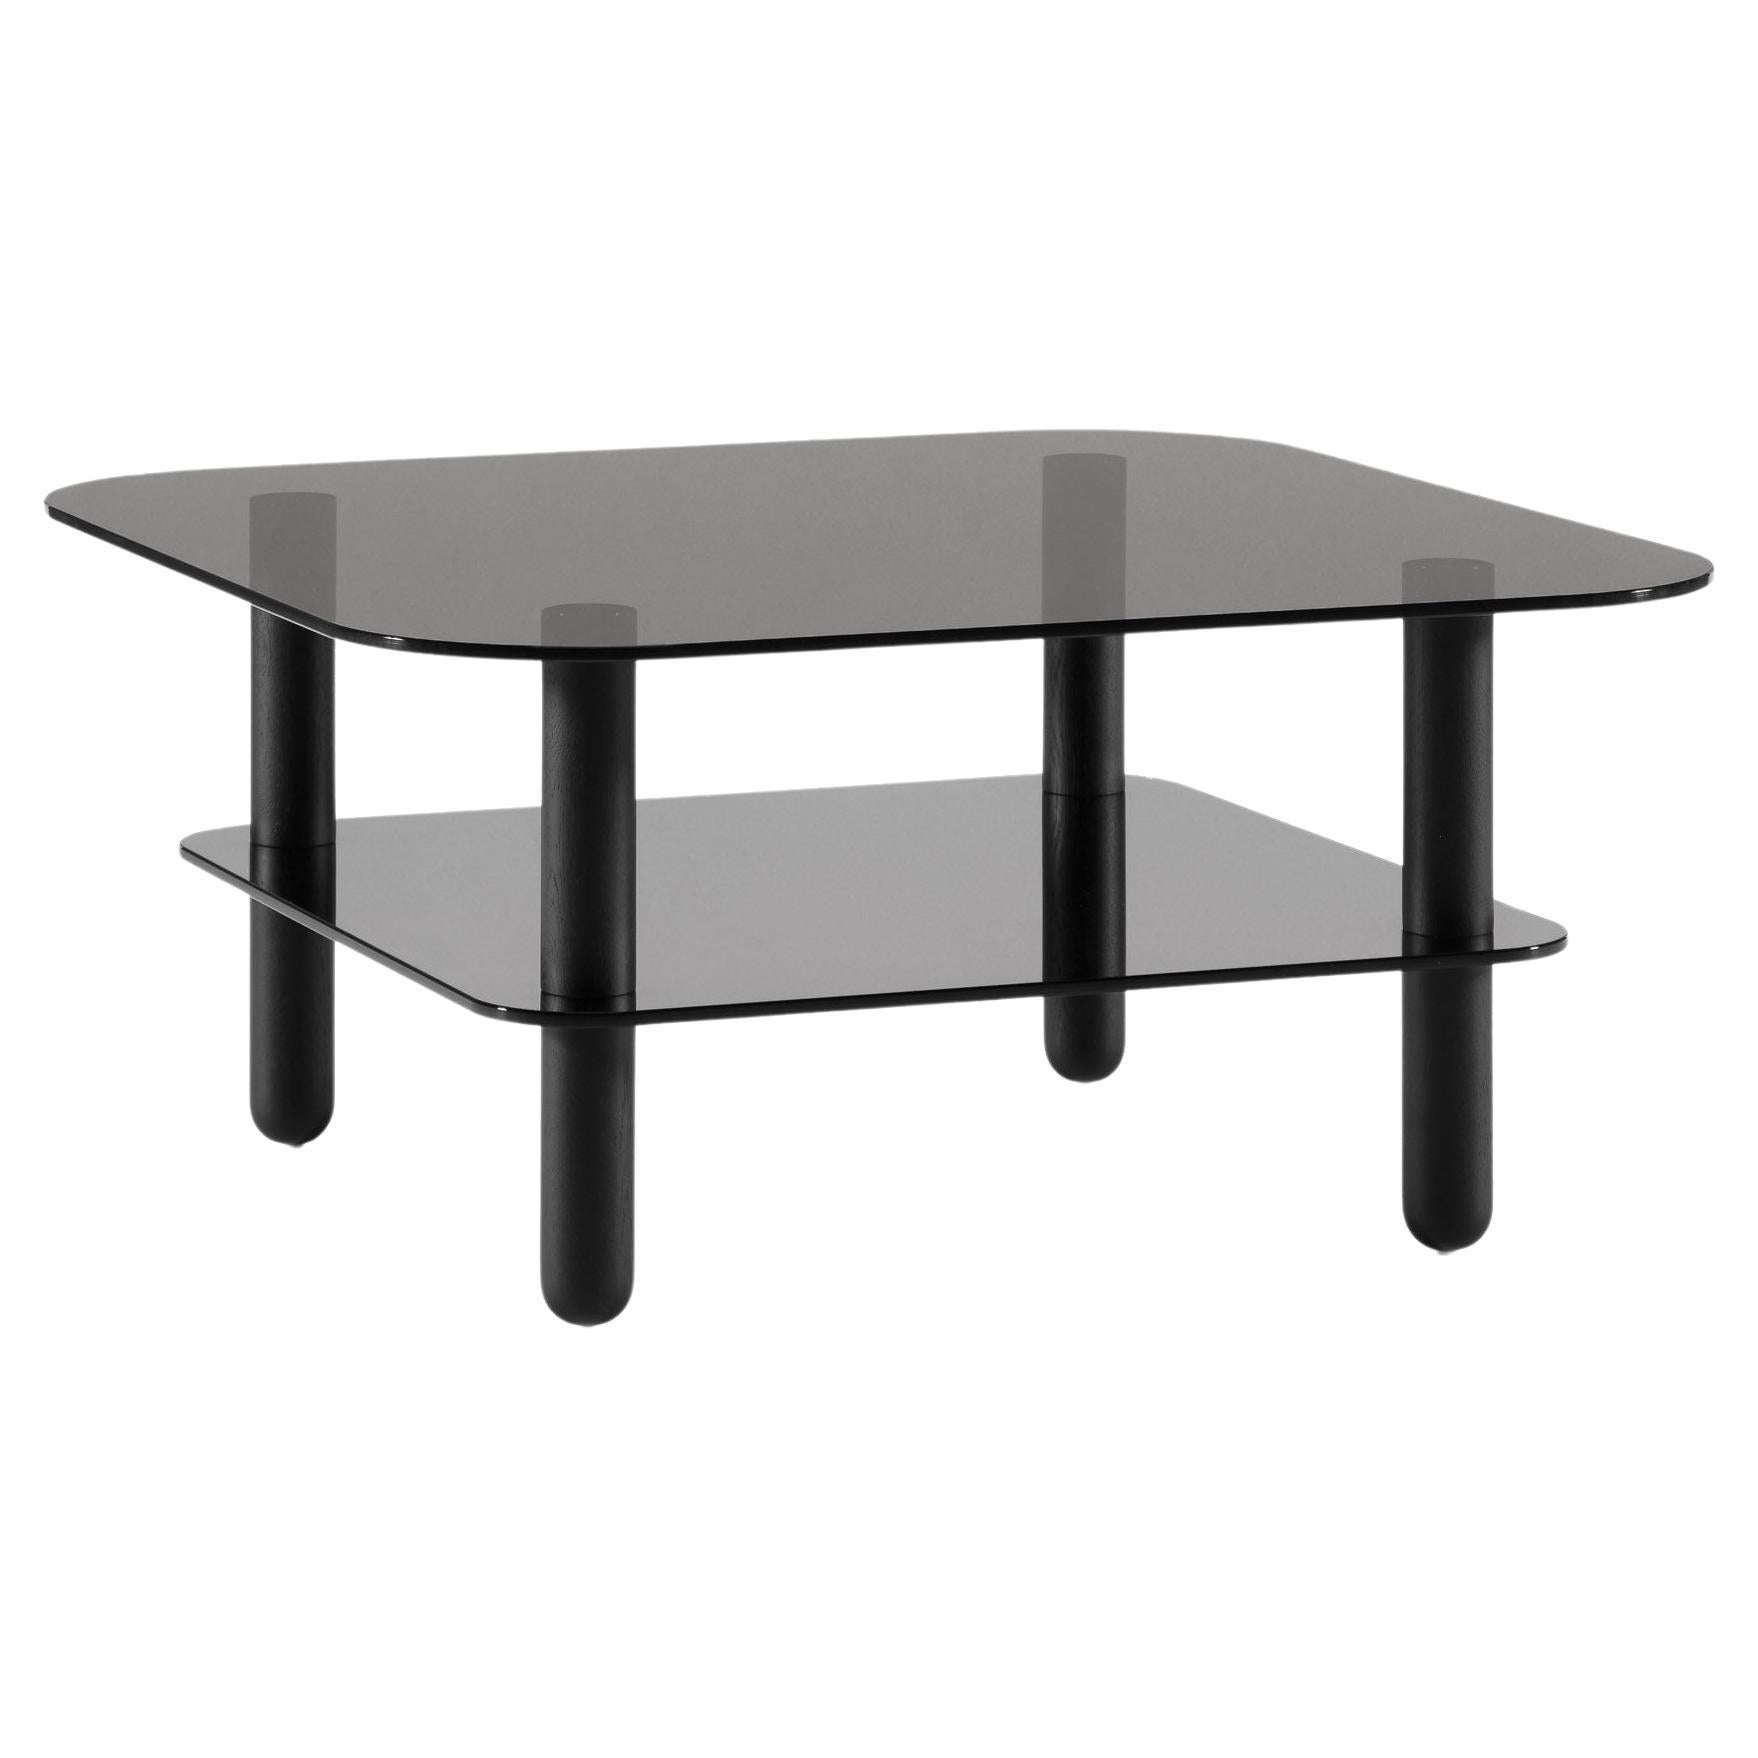 Big Sur Sofa Table High by Fogia, Anthracite Glass , Black Legs For Sale